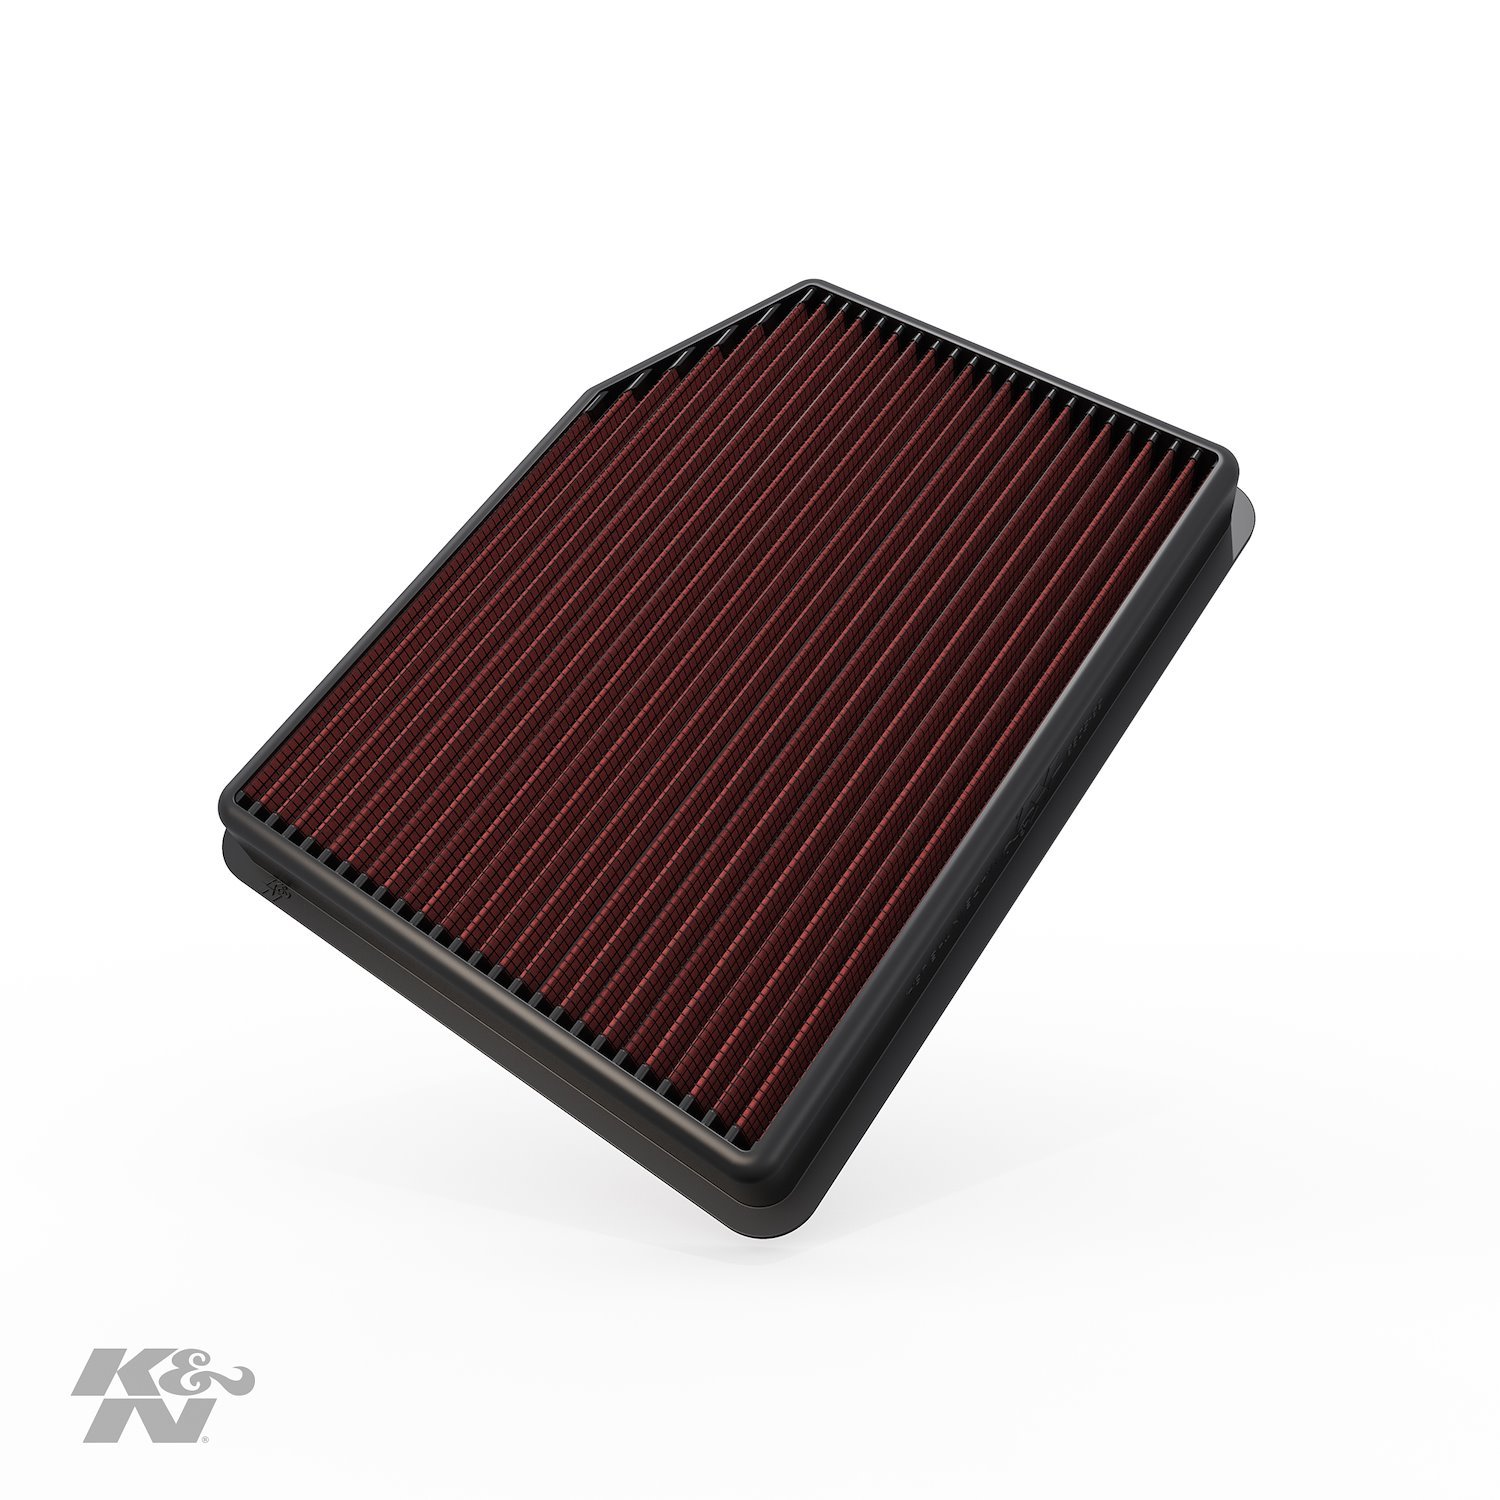 High-Performance O.E.-Style Replacement Air Filter 2019 Silverado/Sierra 1500 Truck 5.3L V8 Fuel Injection